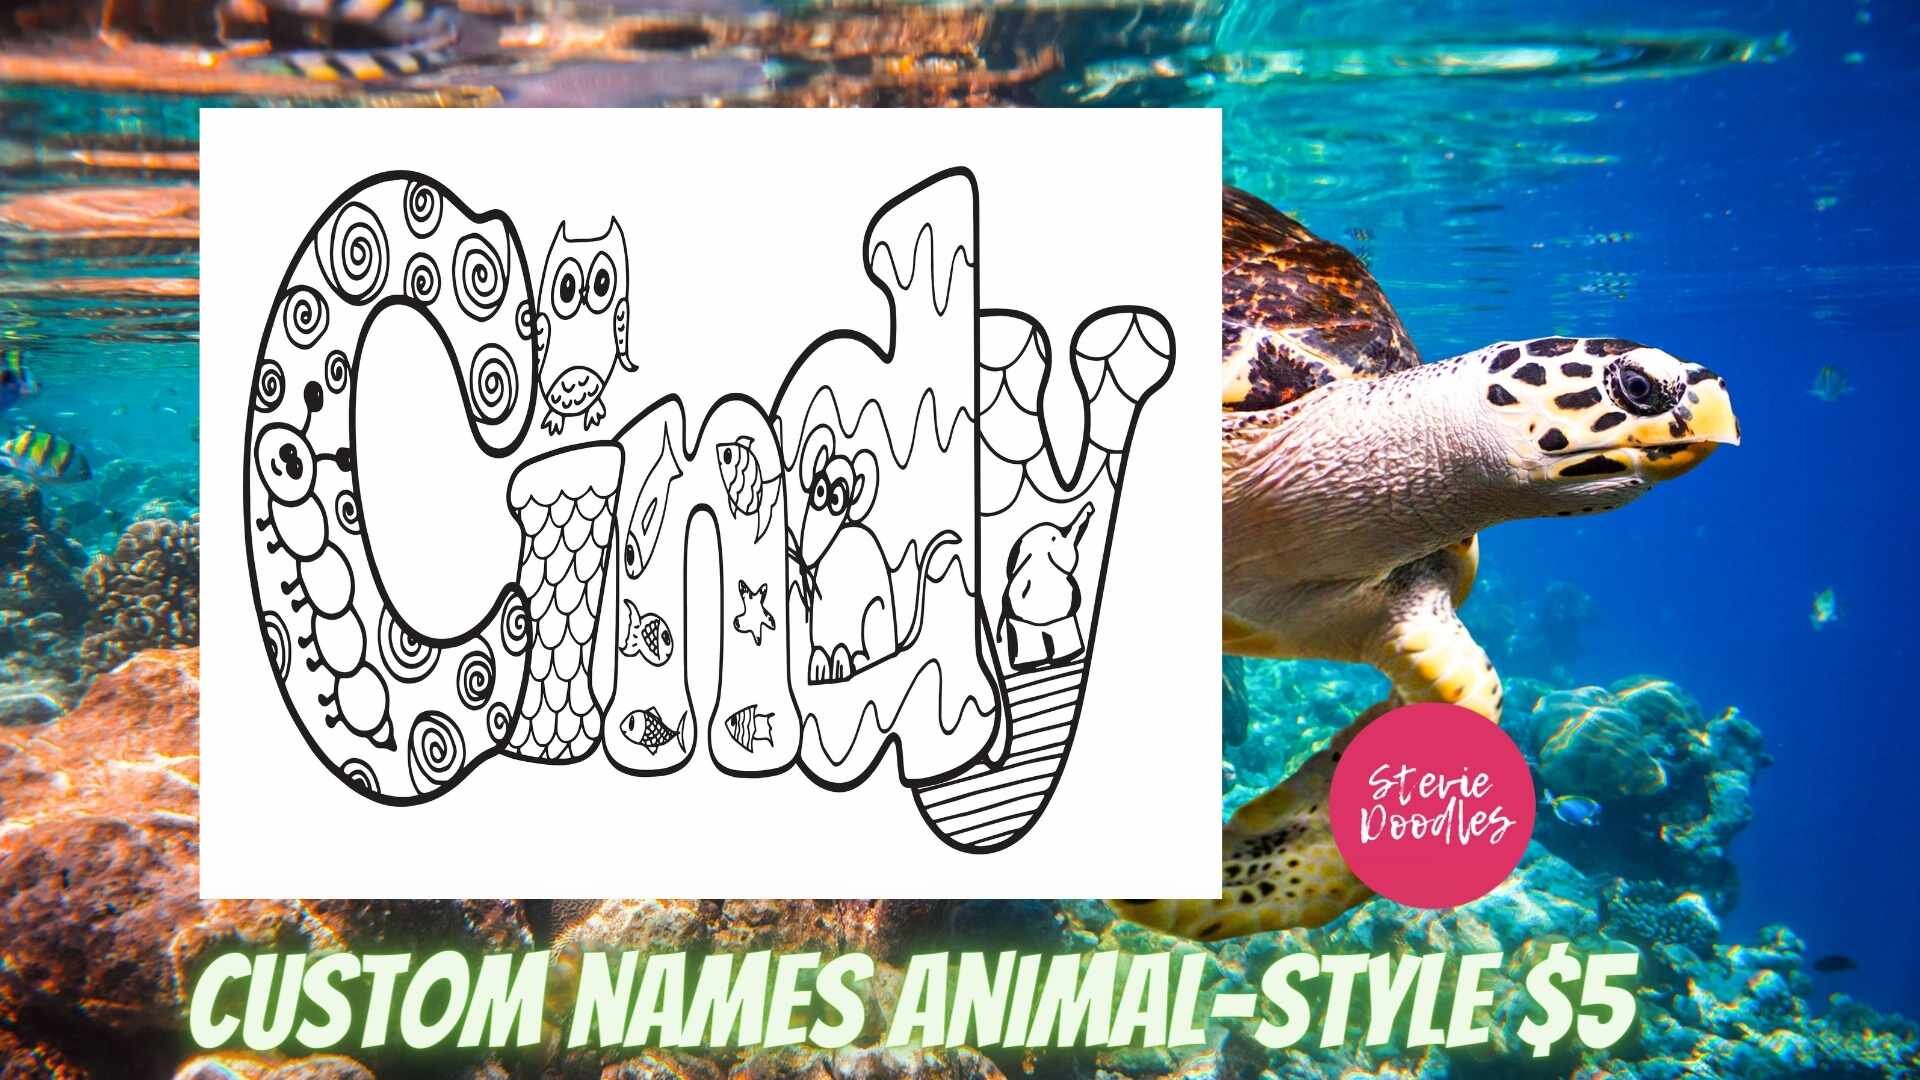 link to animal style custom names on Etsy